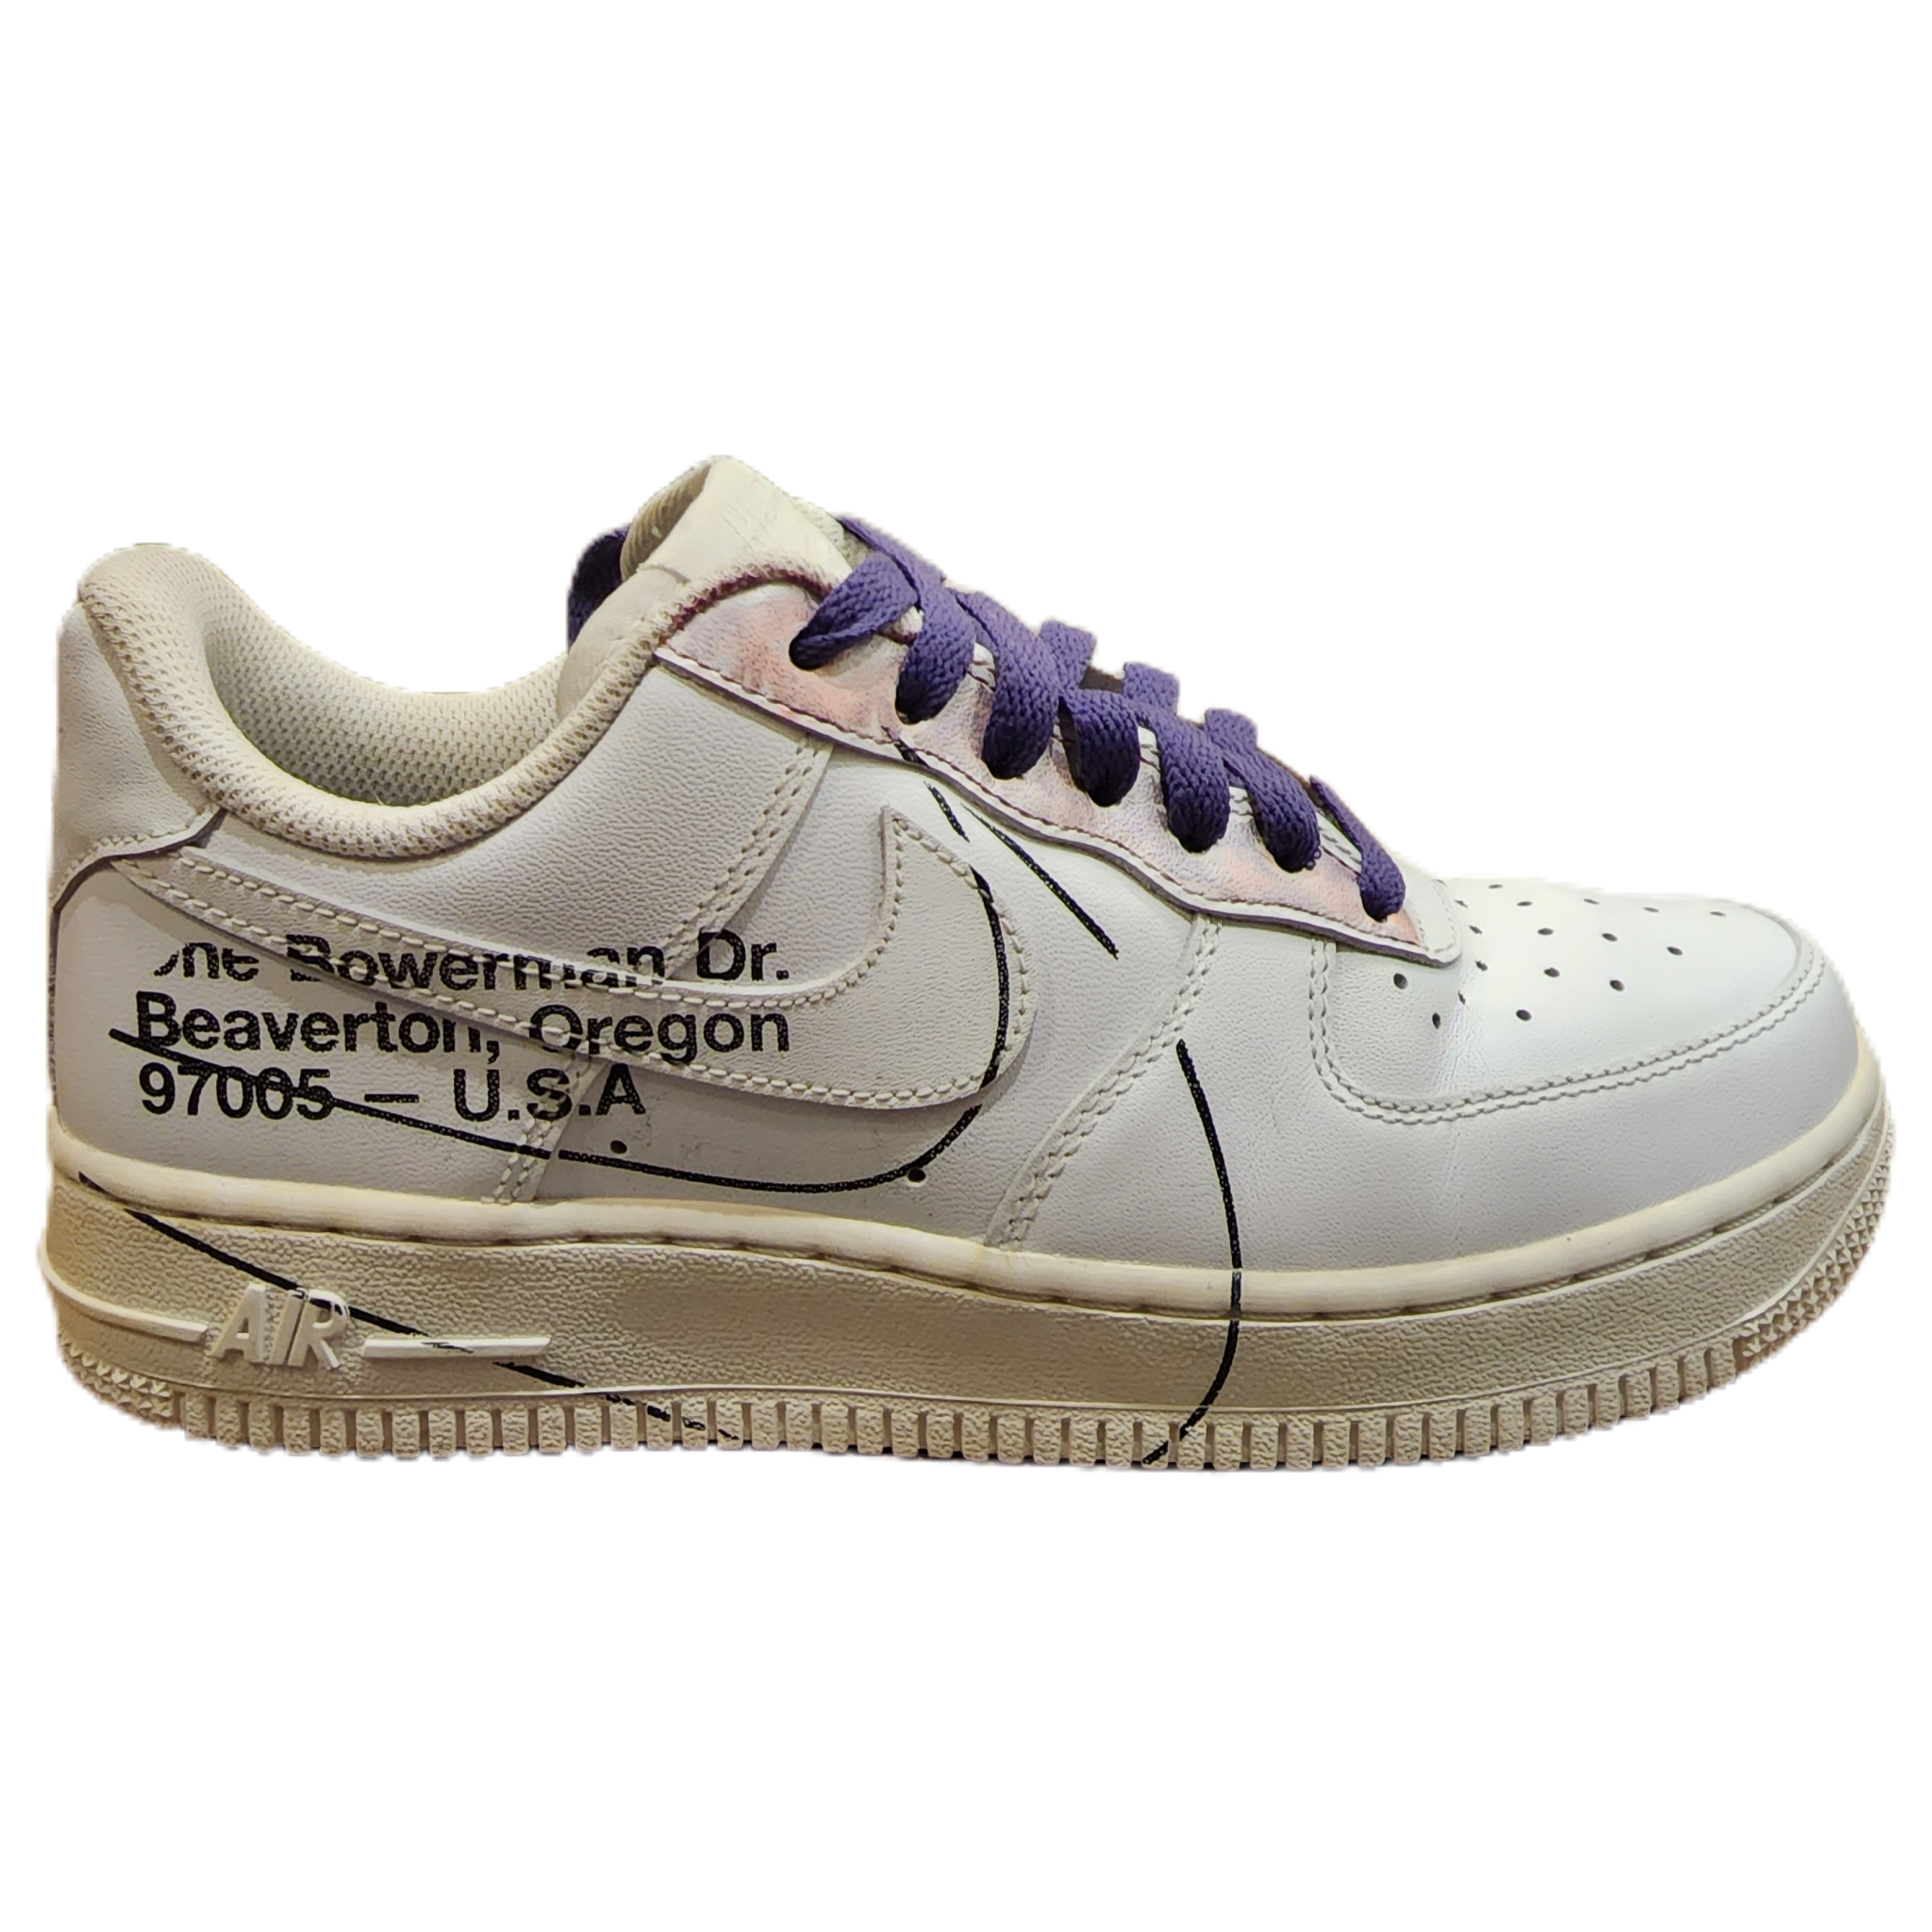 NTWRK Picks - Nike Off White - Campus Exclusive Air Force 1 - Size 6